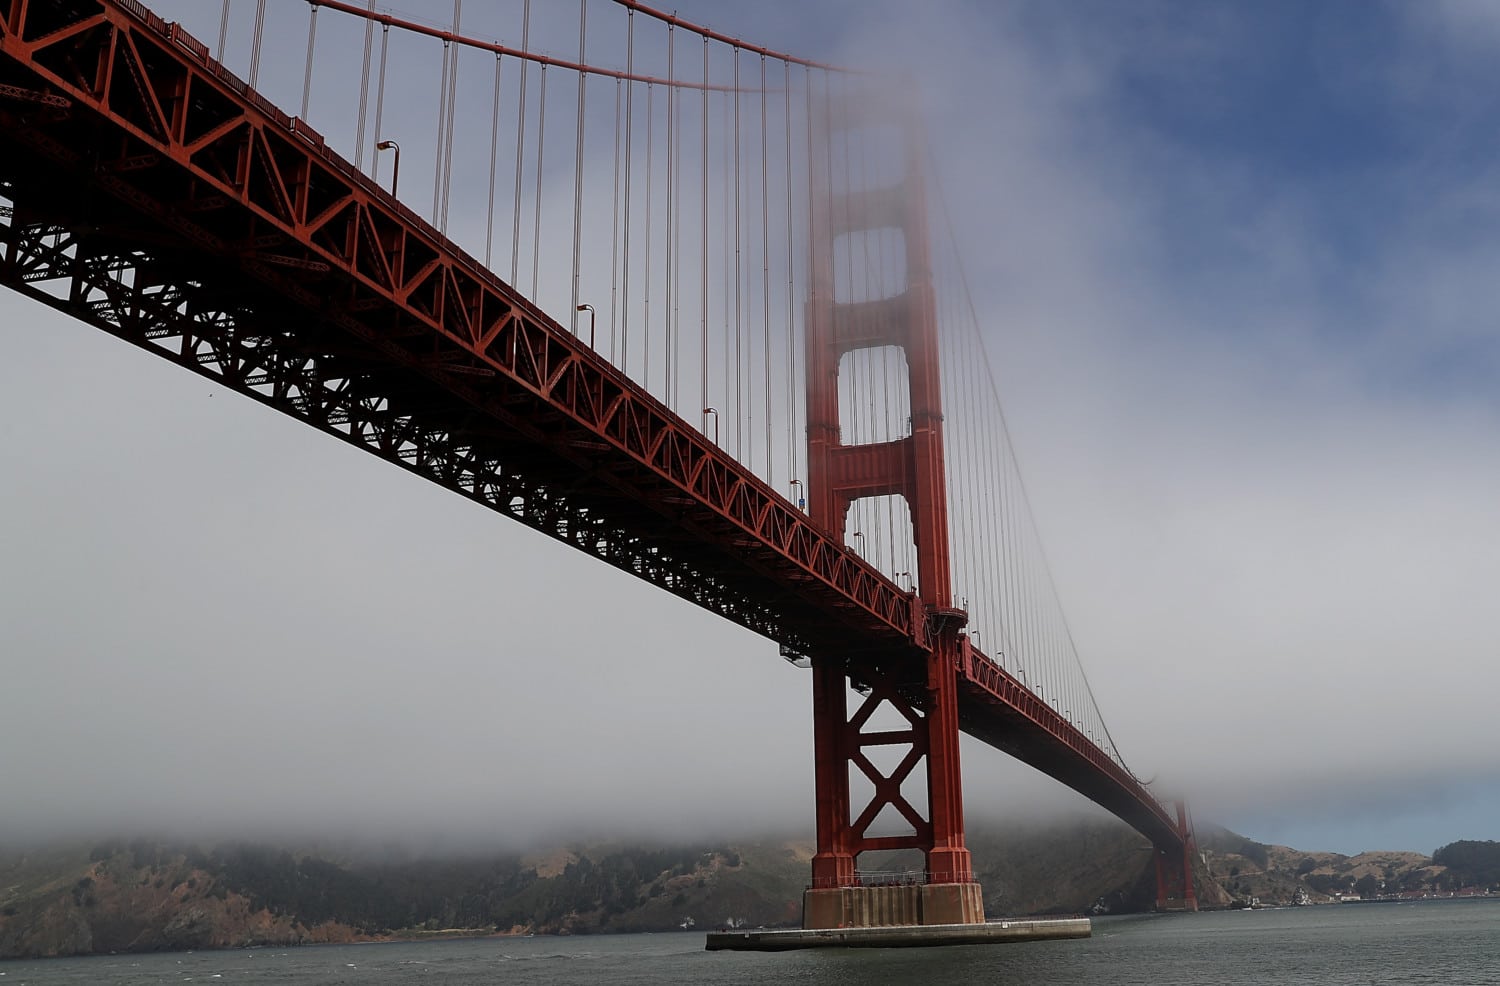 New Video Supporting ISIL Suggests Attacks On San Francisco Landmarks